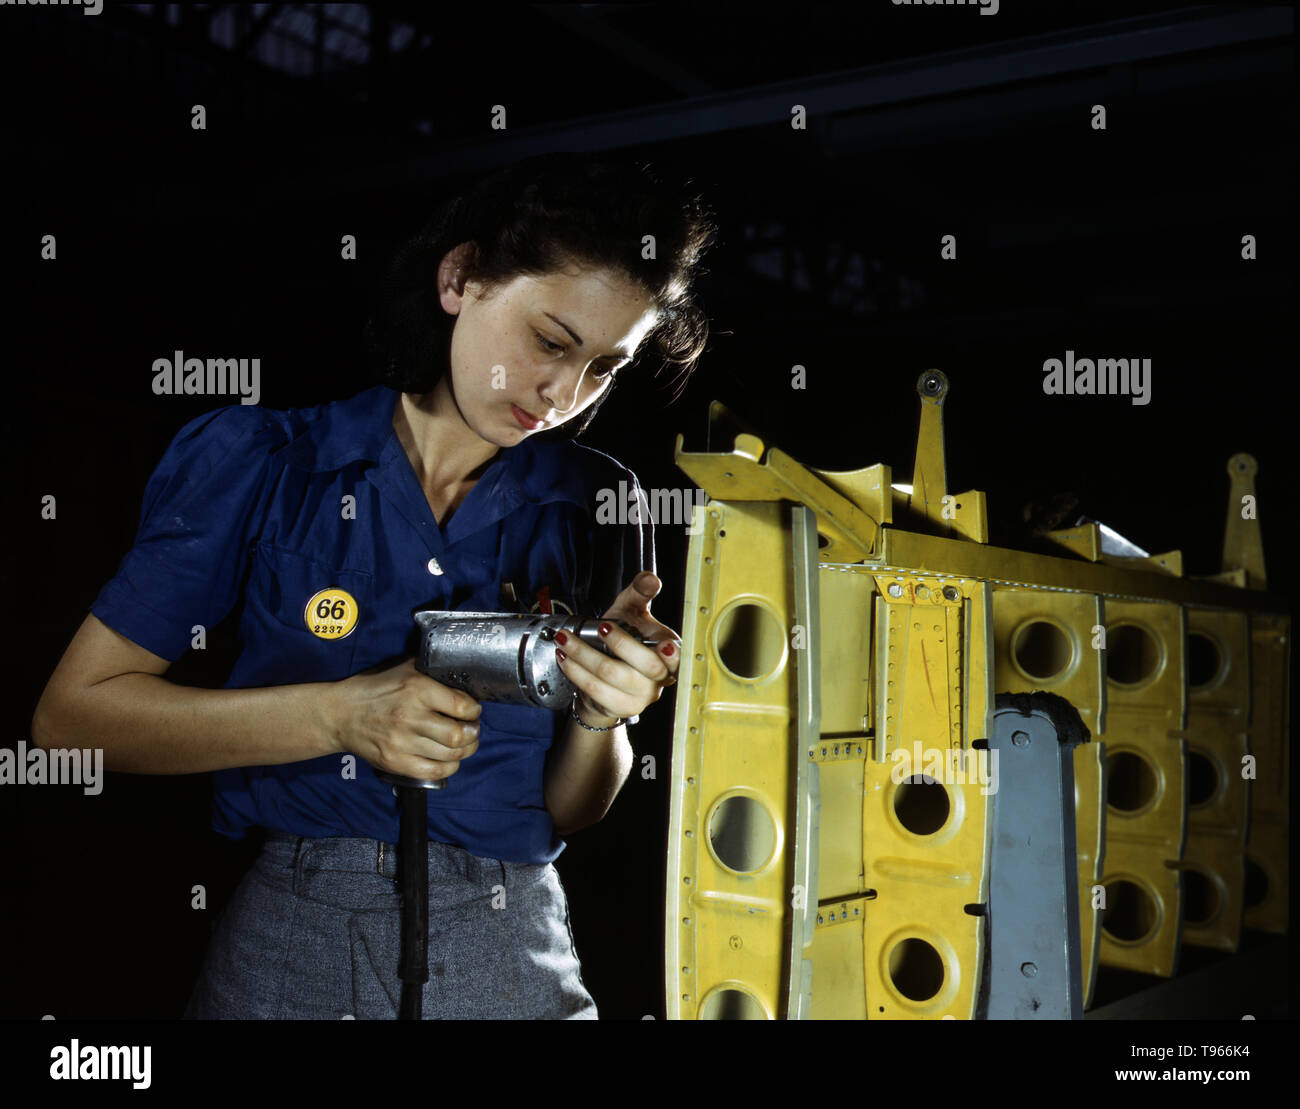 Drilling horizontal stabilizers: operating a hand drill, this woman worker at Vultee-Nashville is shown working on the horizontal stabilizer for a Vultee Vengeance dive bomber, Tennessee. The Vengeance (A-31) was originally designed for the French.  Although the image of 'Rosie the Riveter' reflected the industrial work of welders and riveters, the majority of working women filled non-factory positions in every sector of the economy. Photographed by Alfred T. Palmer, 1943. Stock Photo